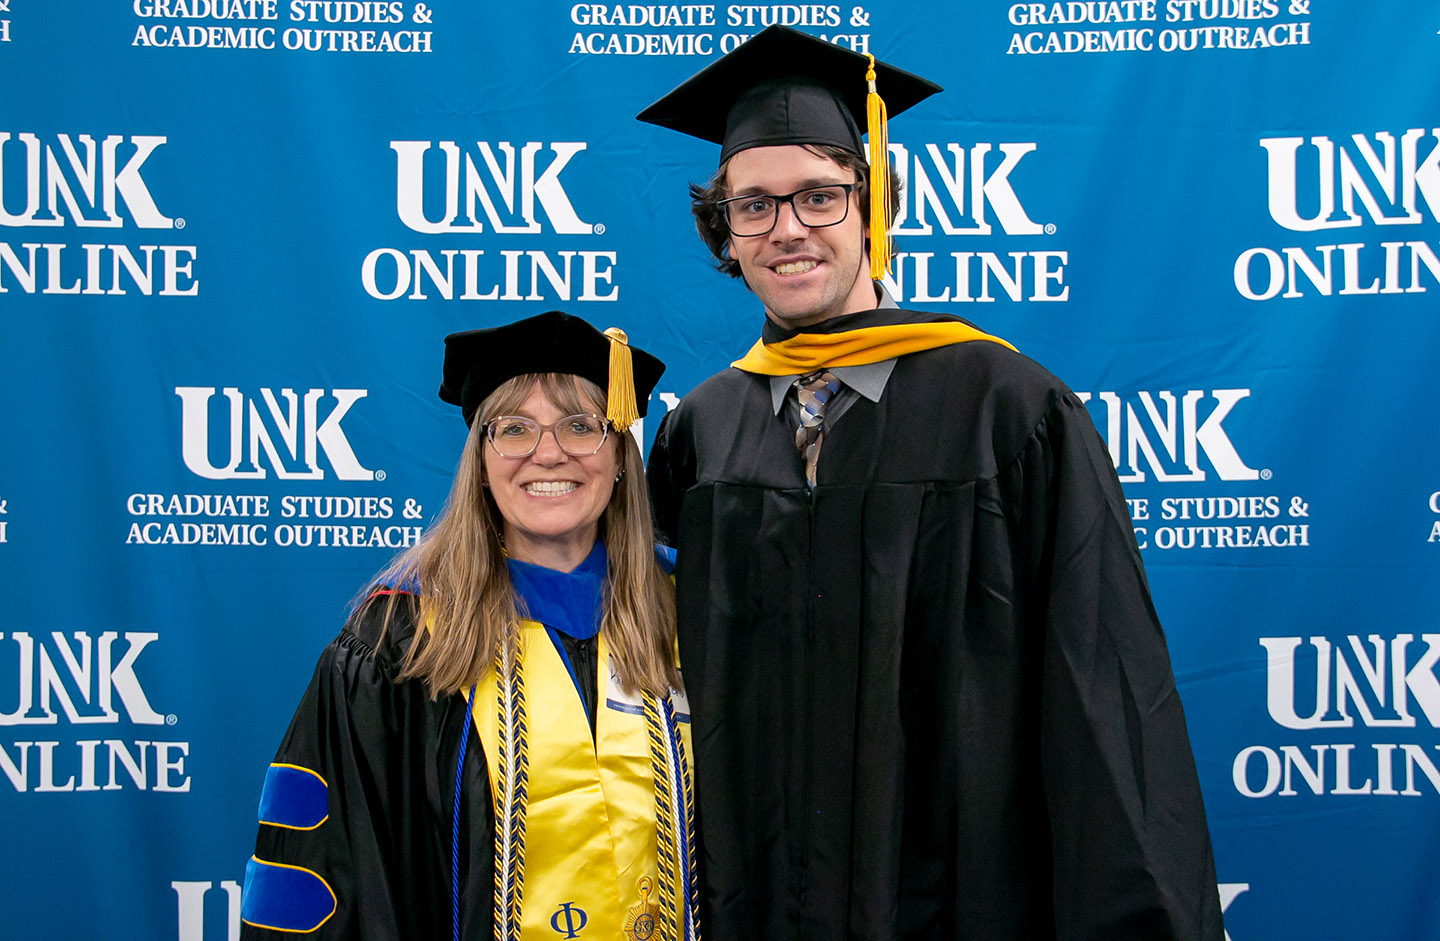 Blase Rokusek poses for a photo with UNK biology professor Kim Carlson during last week’s spring commencement ceremony. Rokusek earned a master’s degree in biology.